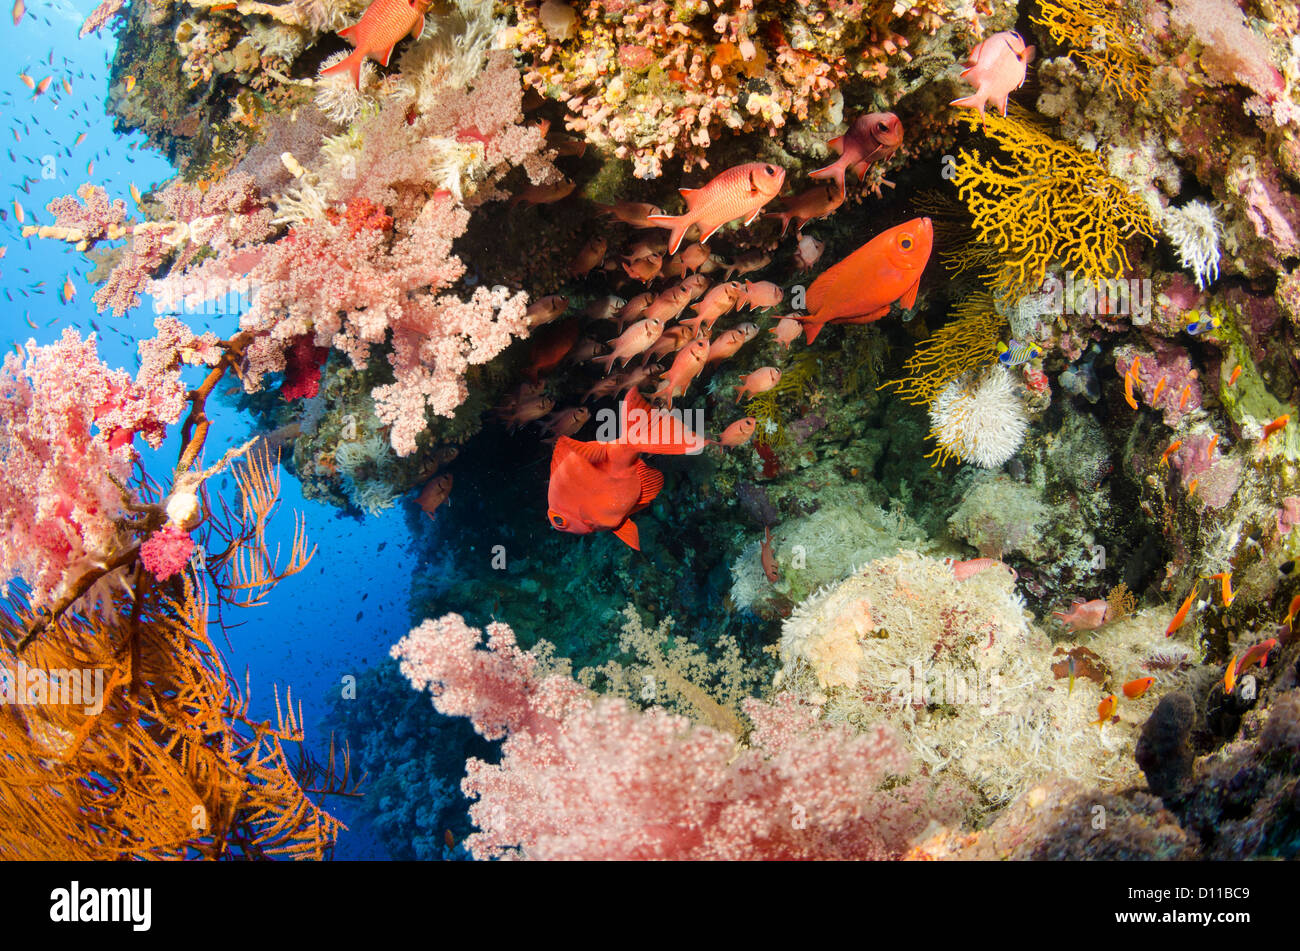 Typical Red Sea coral reef, Elphinstone Reef, Marsa Alam, Egypt, Red Sea, Indian Ocean Stock Photo